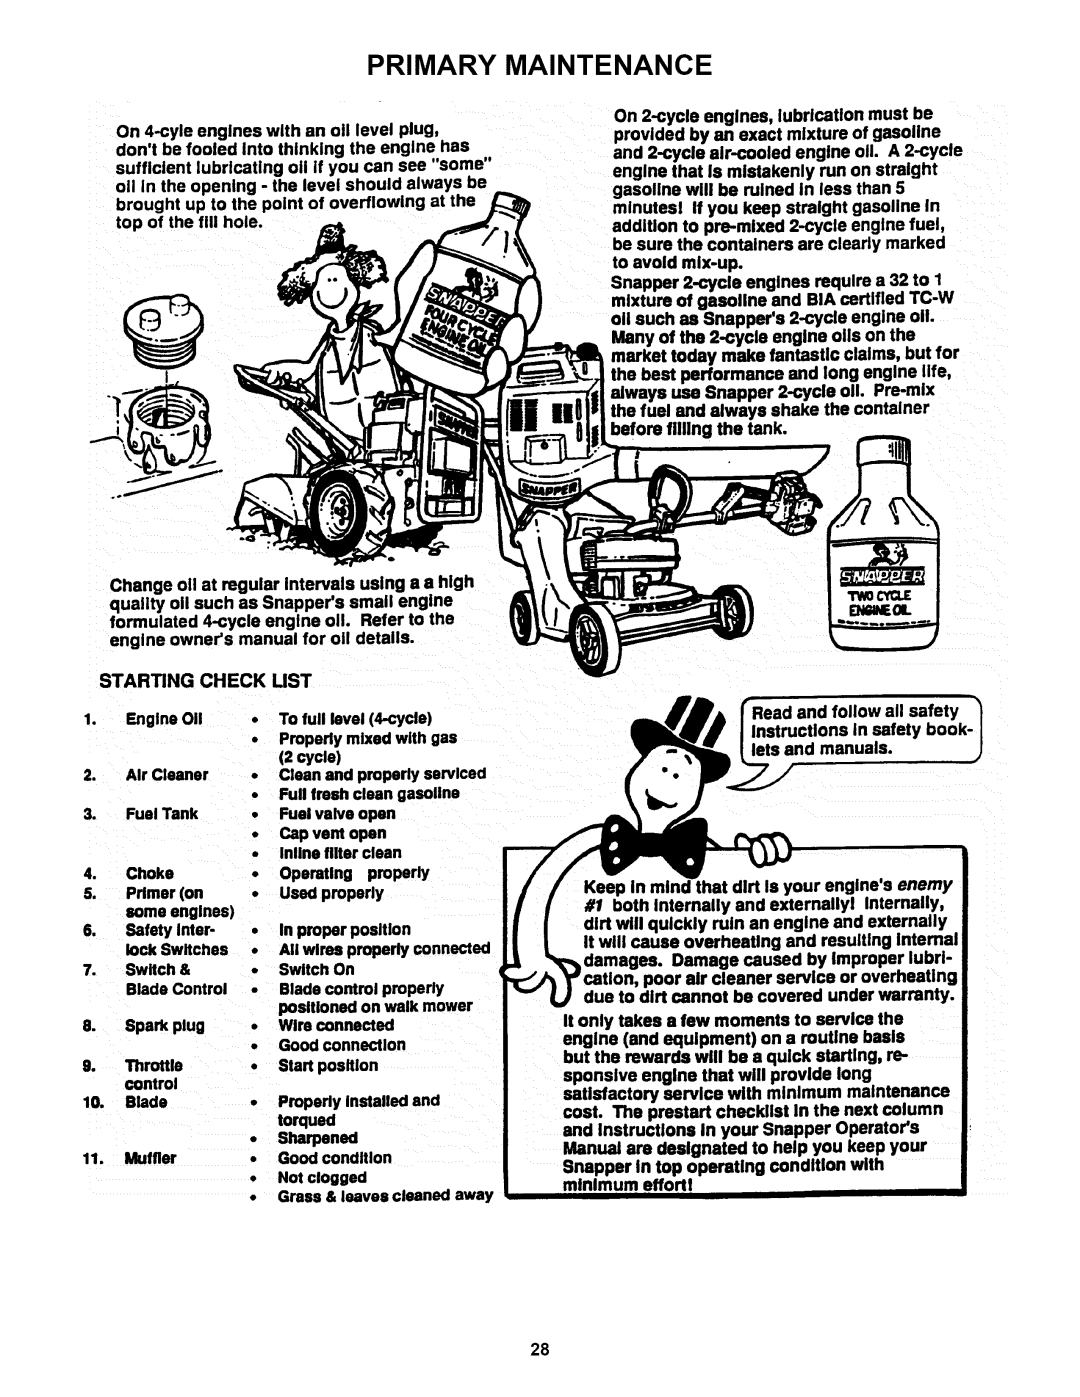 Snapper P216518B important safety instructions Primary Maintenance, Starting Check Ust 